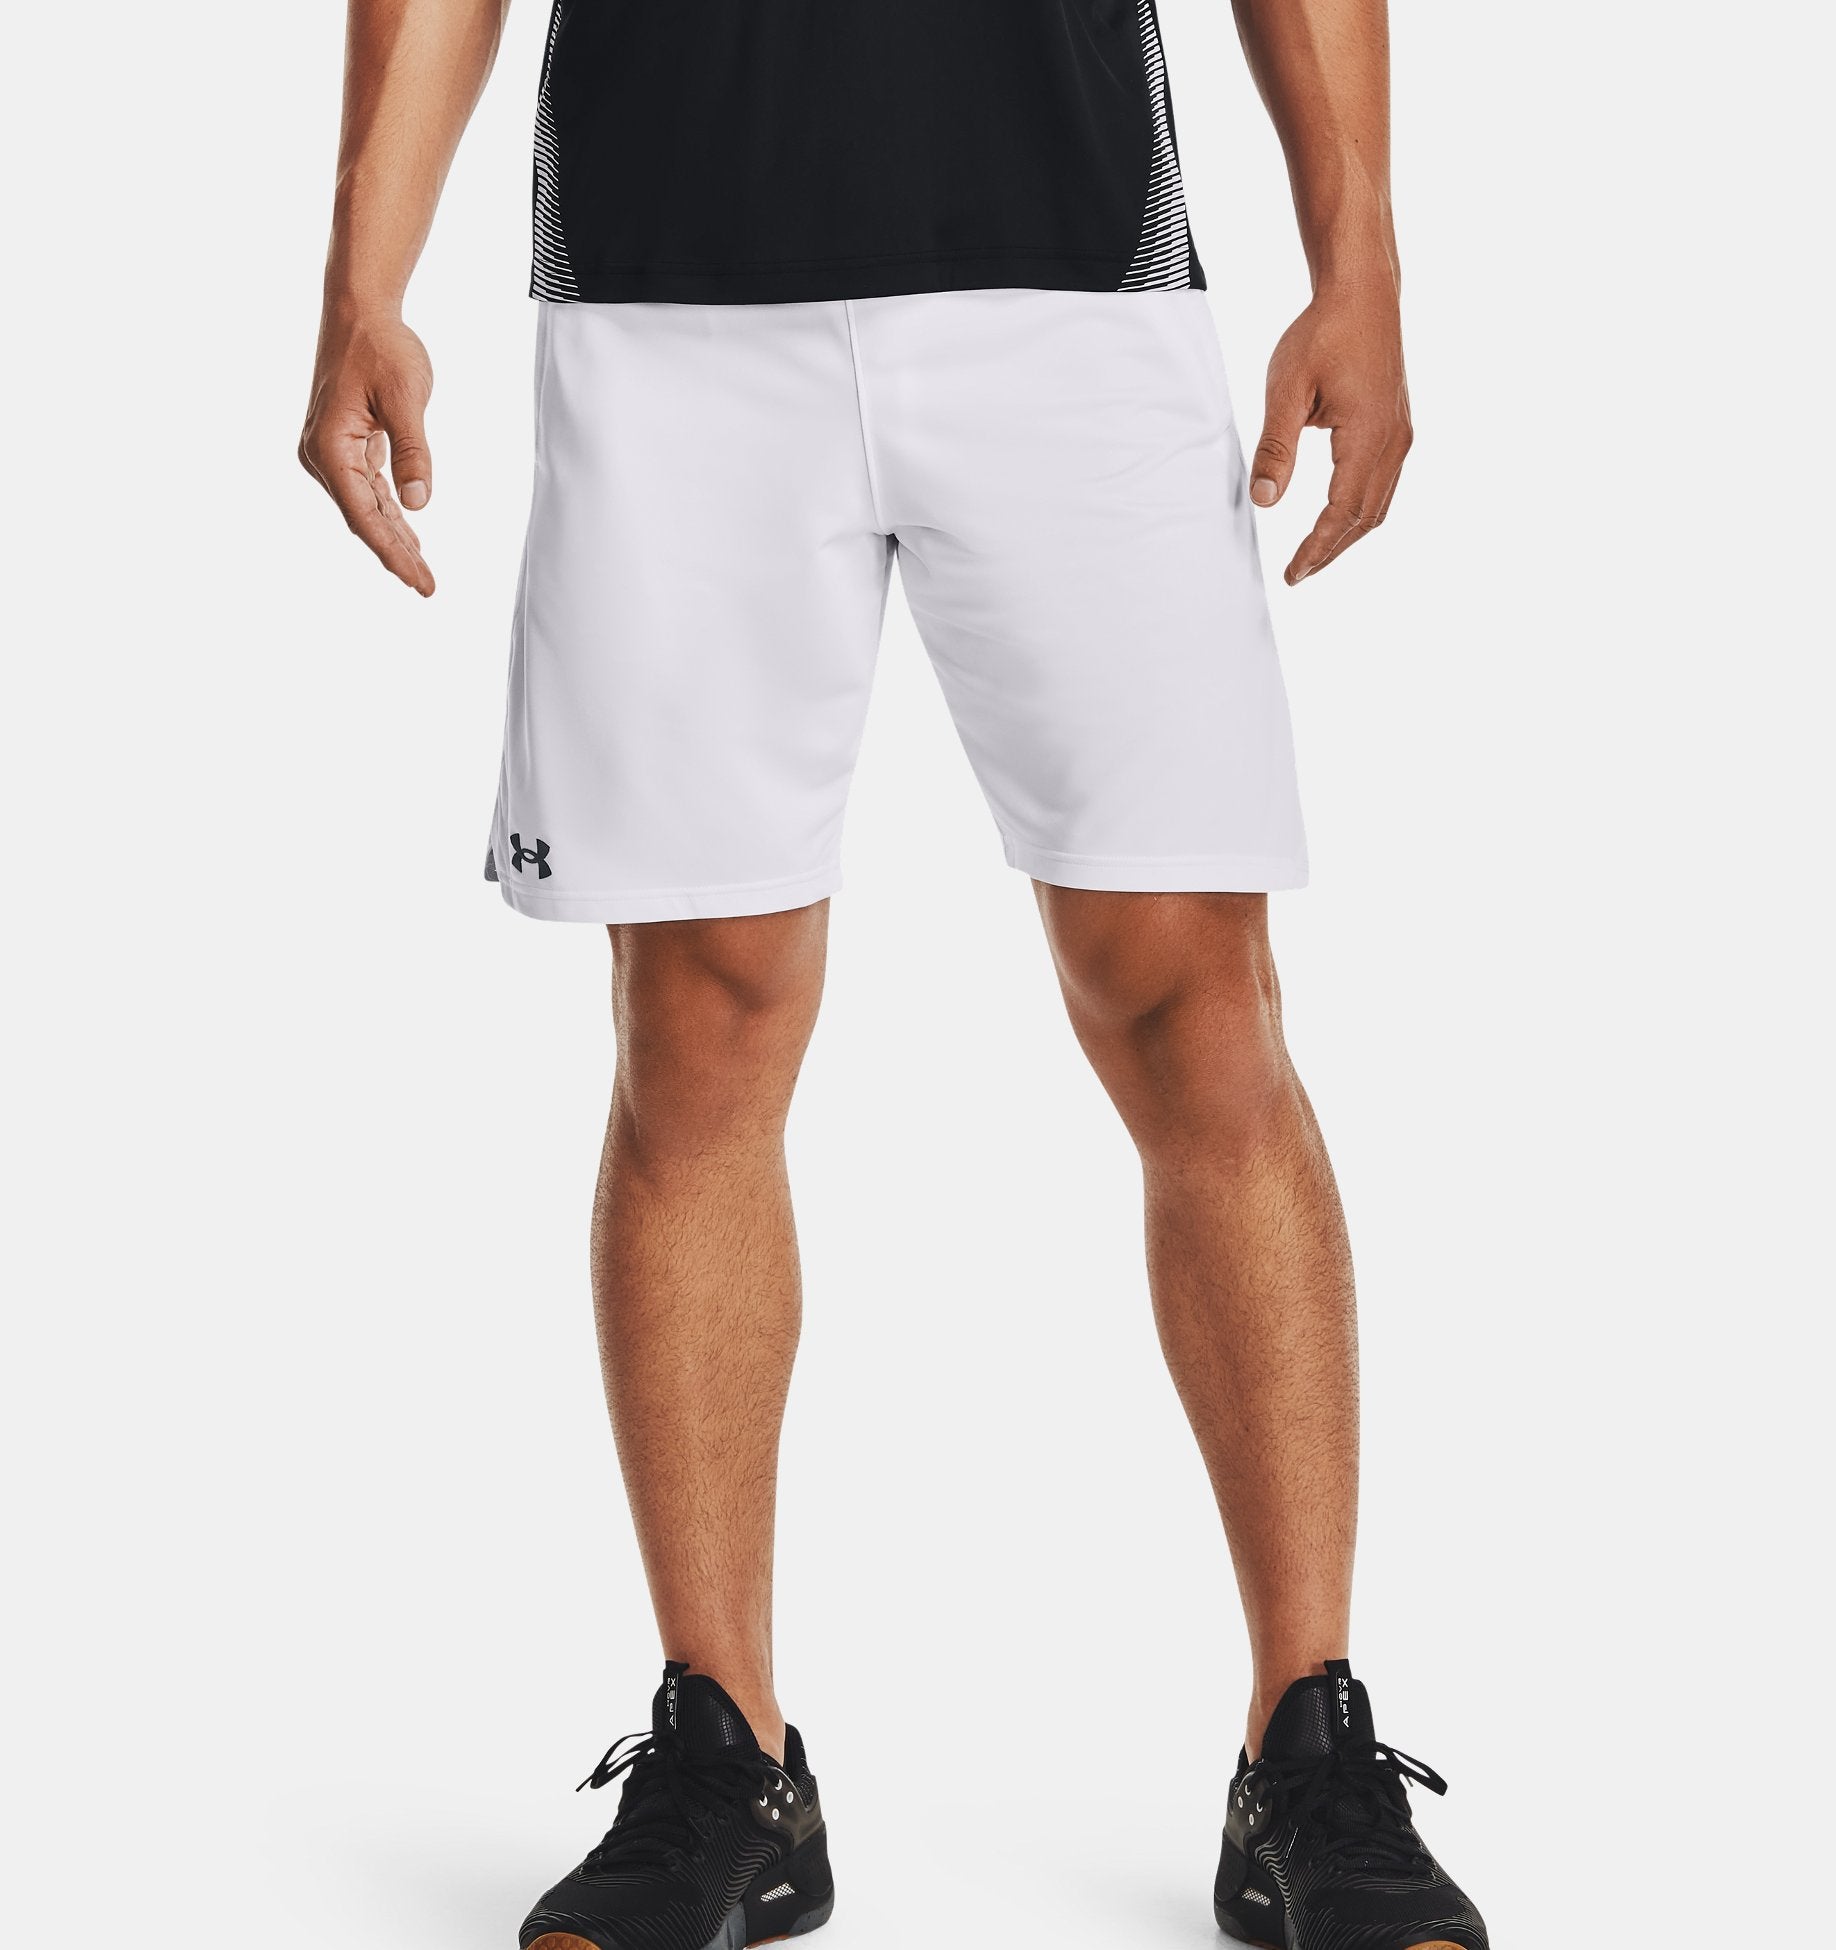 Under Armour Men's Locker 9" Pocketed Short Apparel Under Armour White/Stealth Gray-100 S 